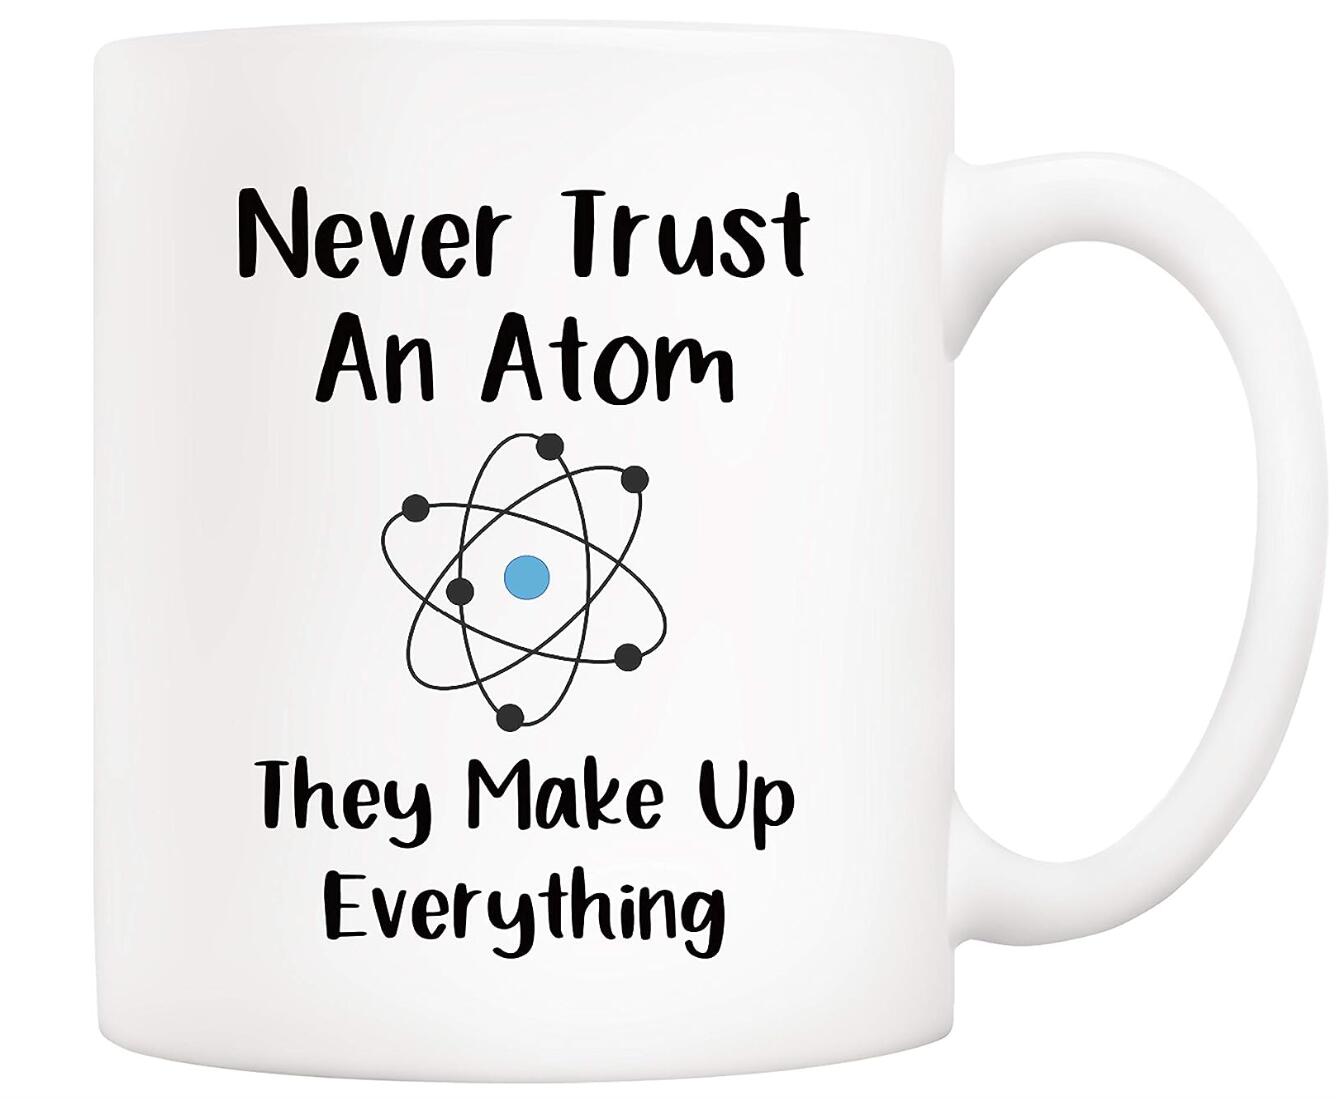 Never Trust an Atom They Make Up Everything Coffee Mug Teacher's Day Gift Cup